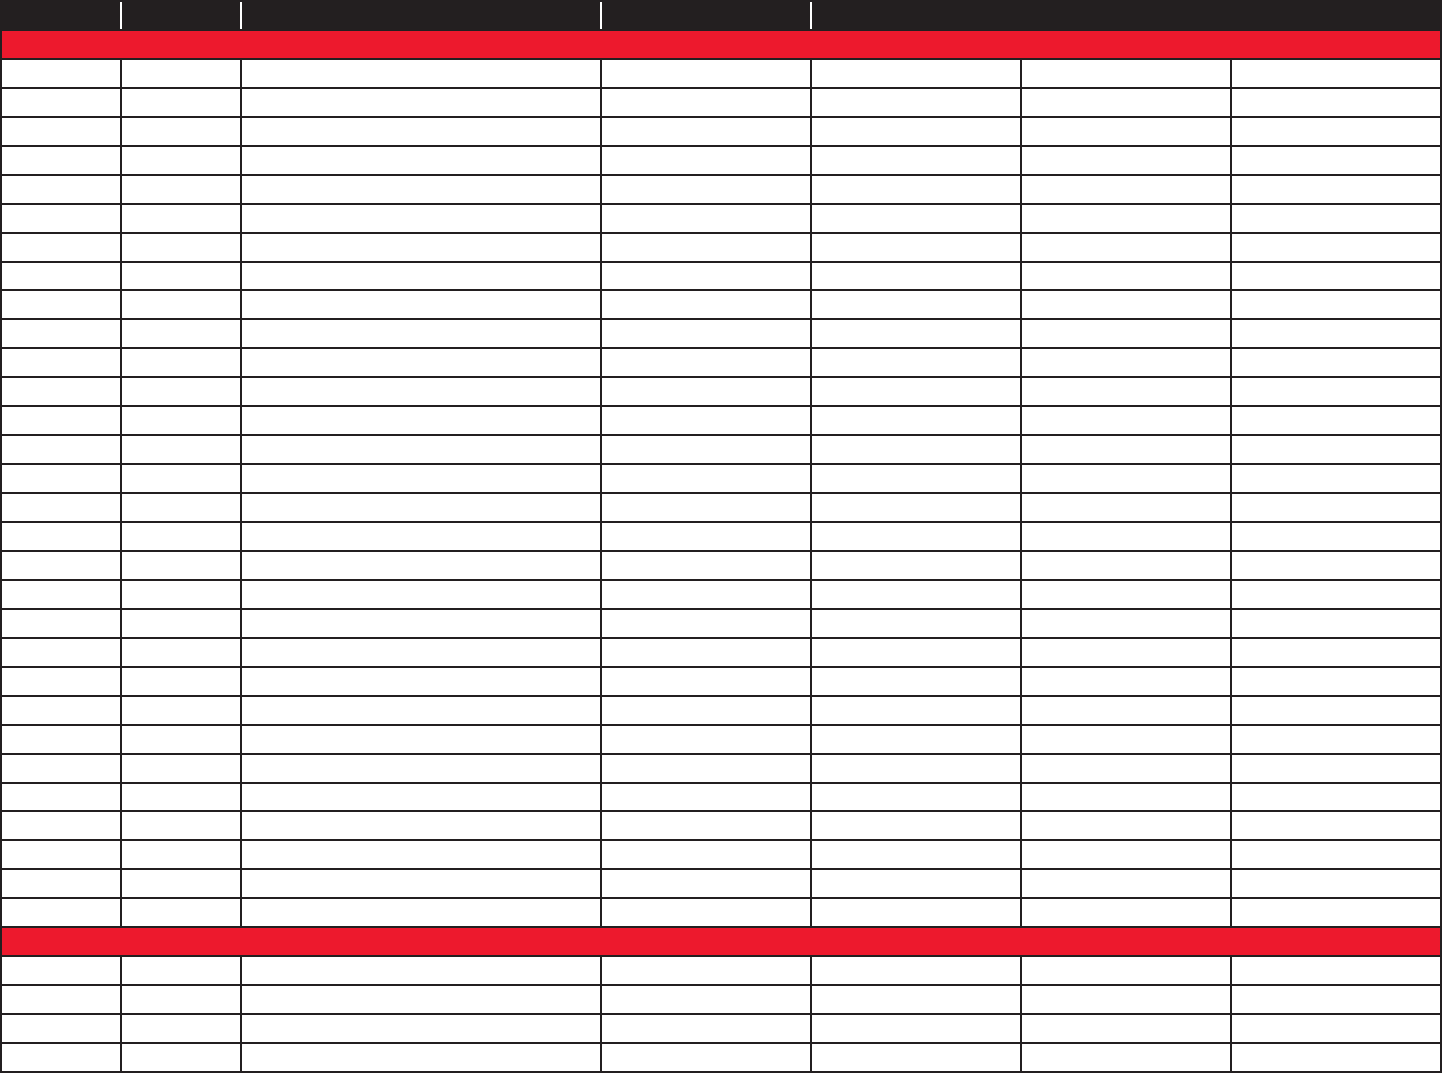 Specialized Hanger Fit Chart 2017